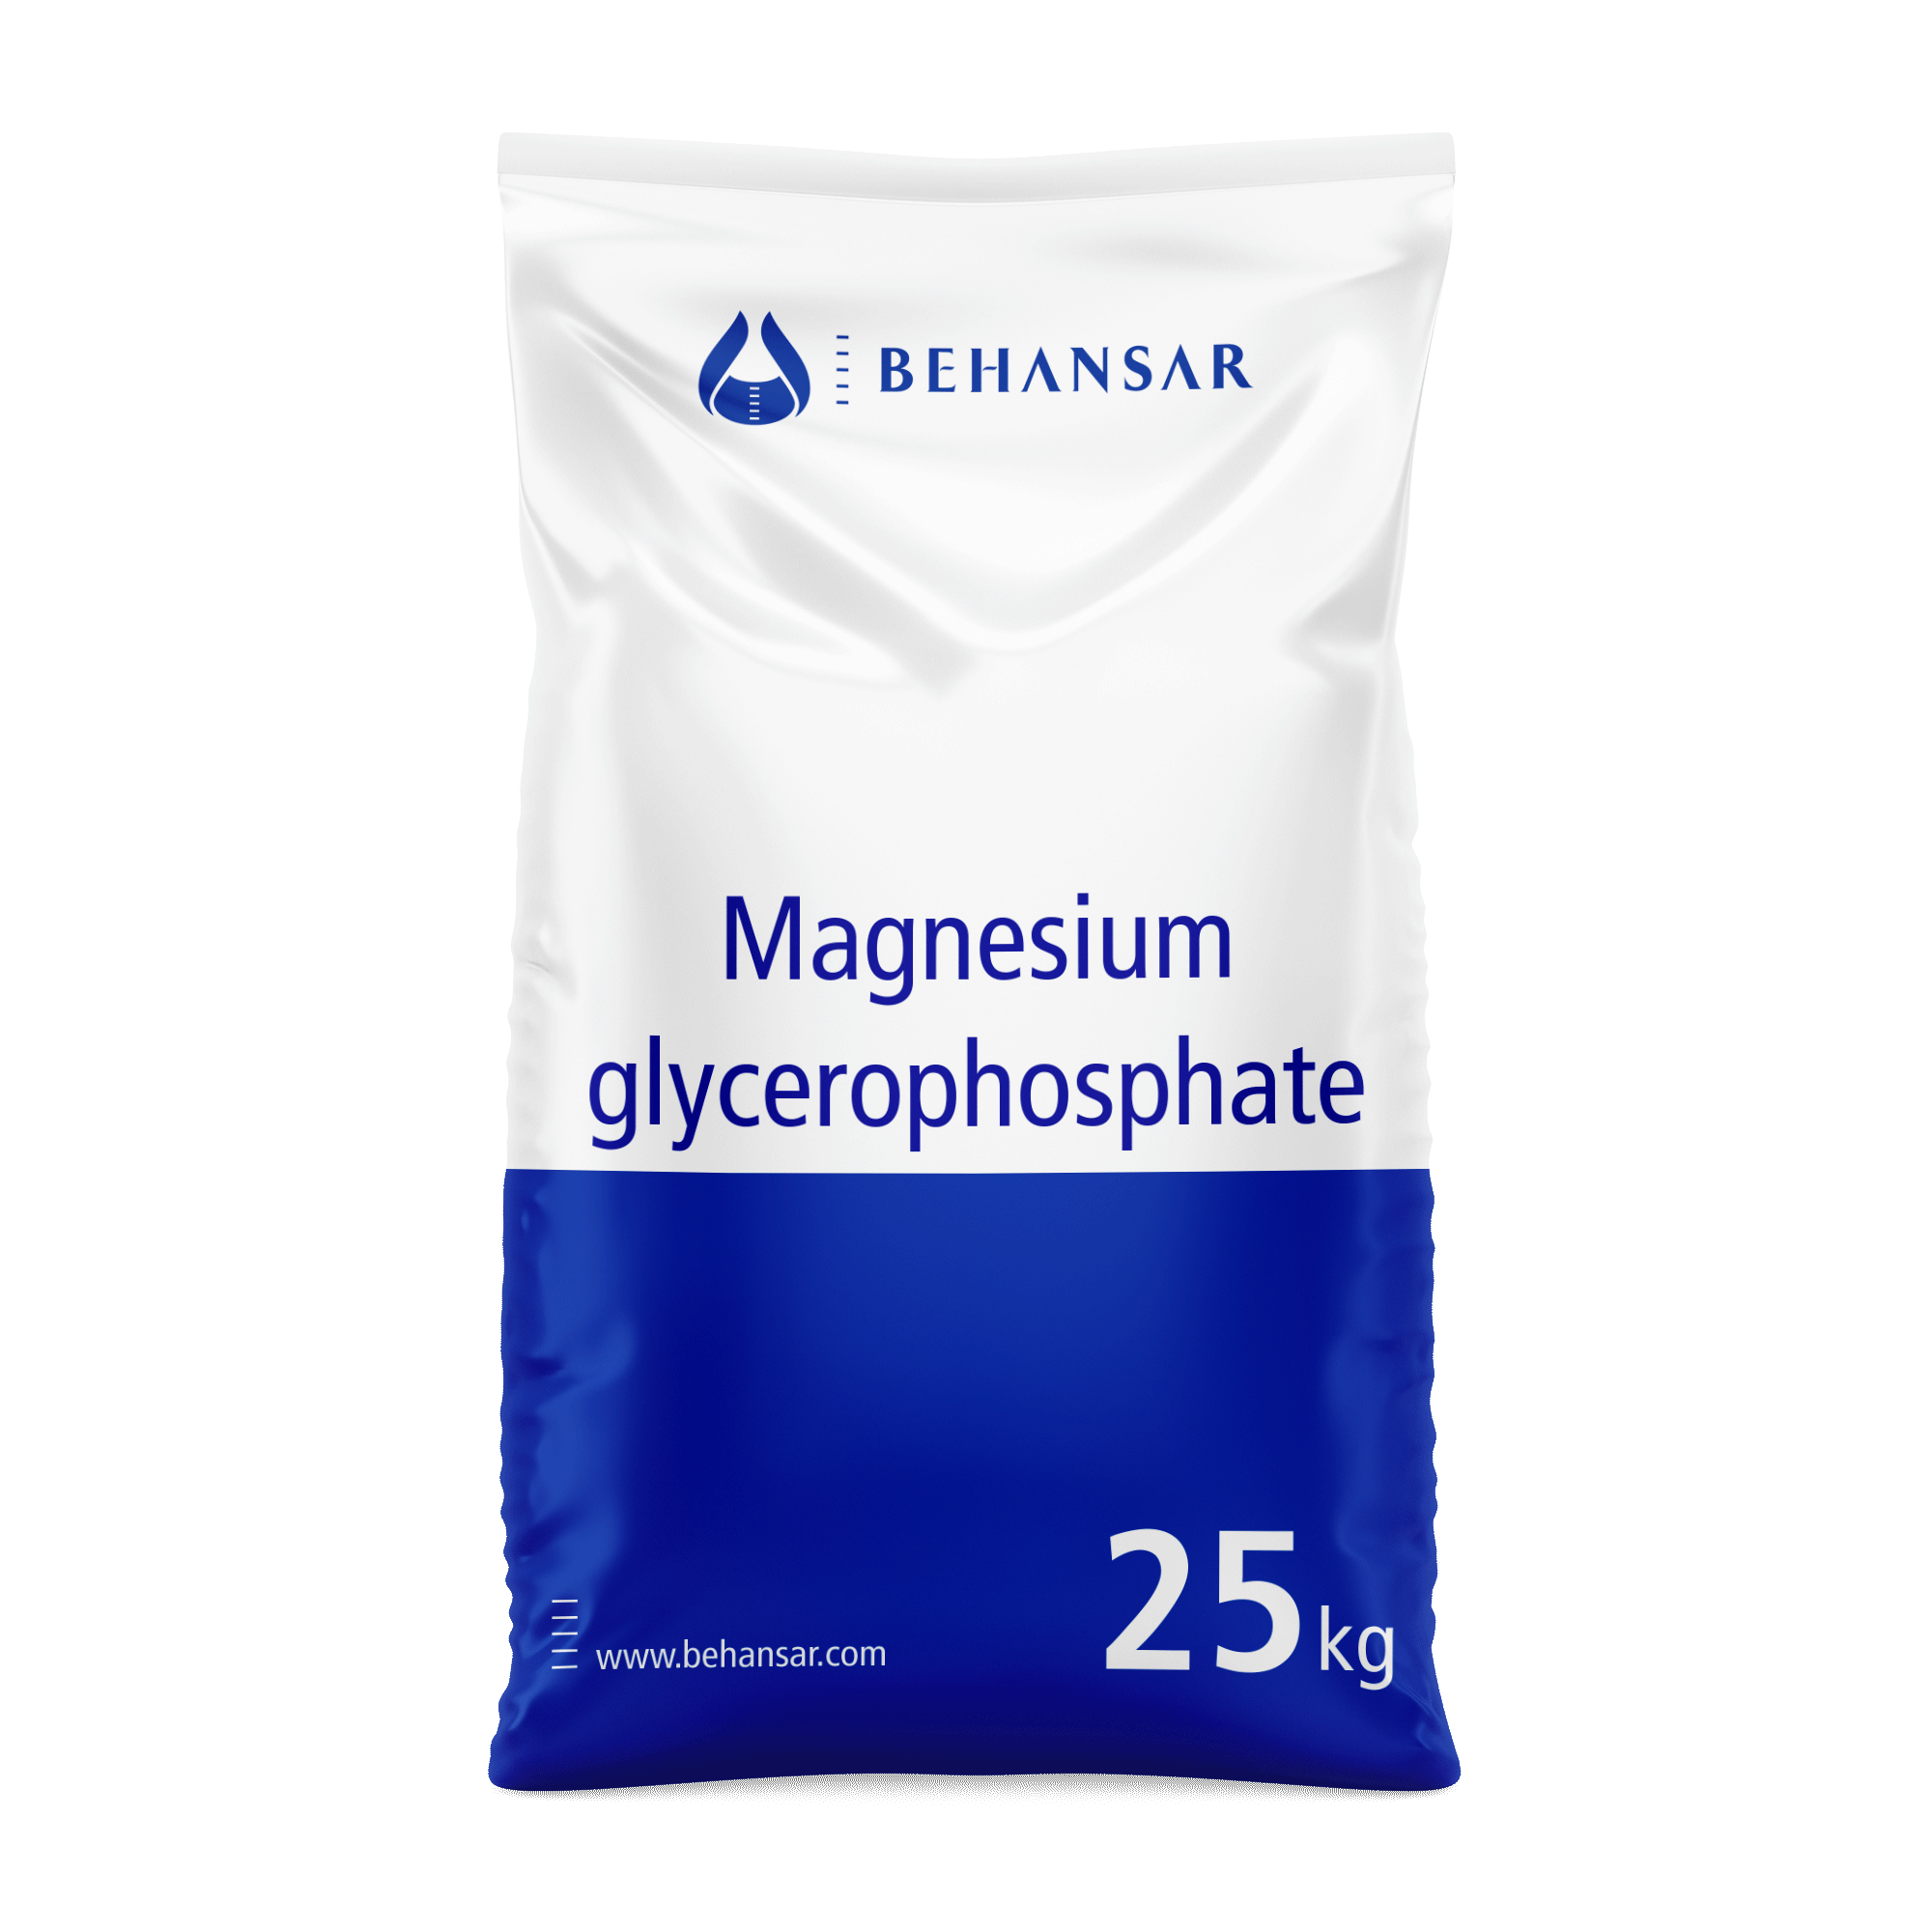 Magnesium glycerophosphate is one of the products of Behansar Co